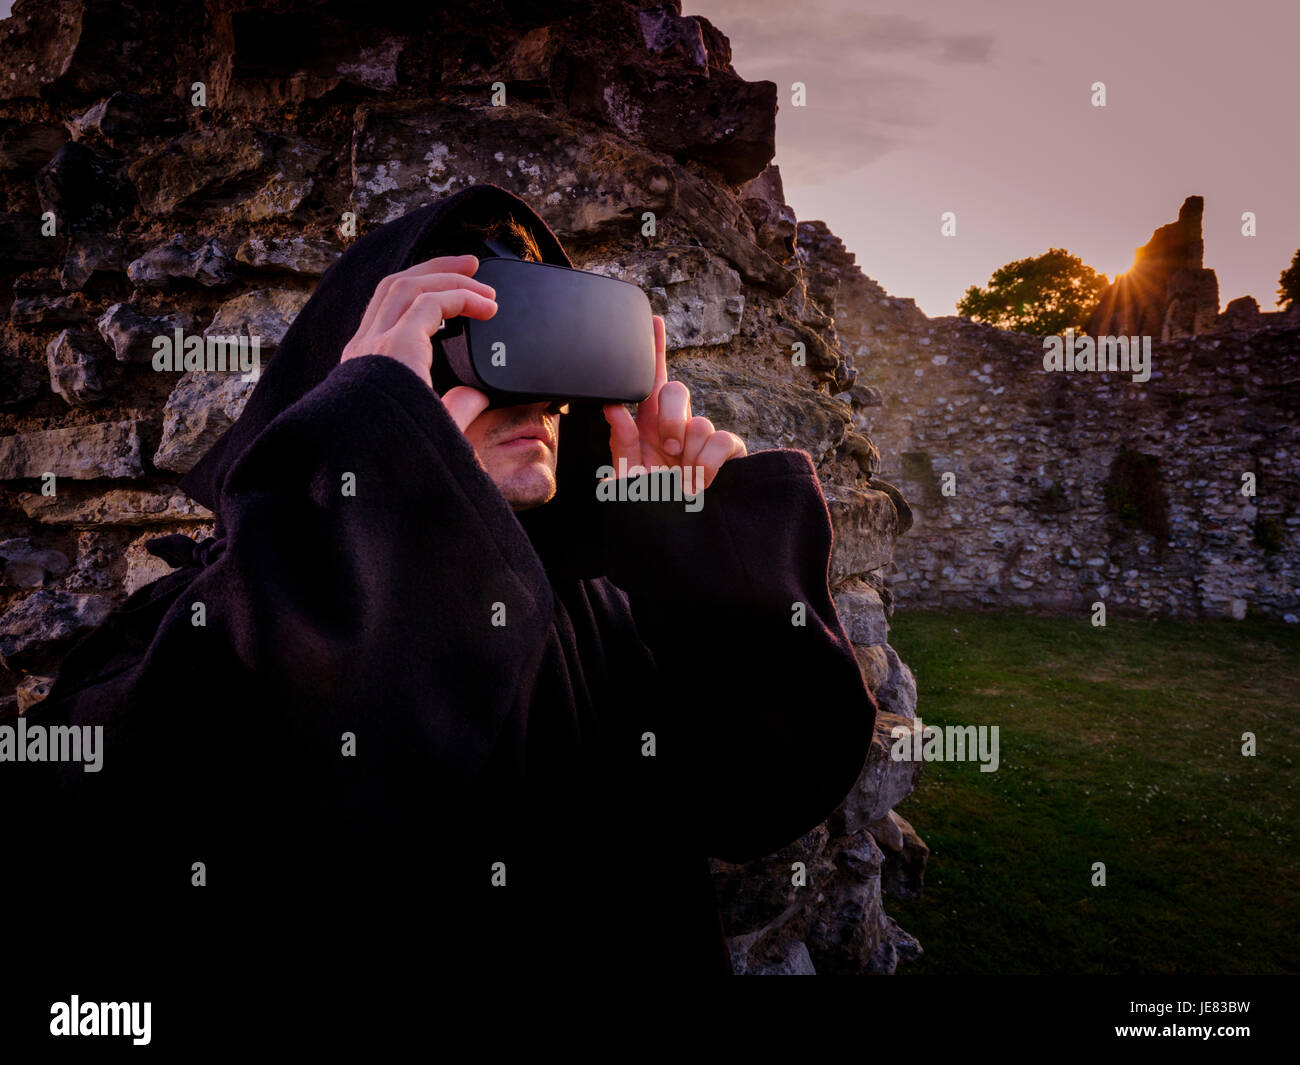 Picture taken 19/06/17 Embargoed until 00.01 23/06/17: St Augustine’s Abbey – part of Canterbury’s World Heritage site - has been ‘rebuilt’ in virtual reality as part of a collaboration between English Heritage and the University of Kent. From 24th June, visitors will be able to sit in a new pod in the visitor centre and experience a virtual tour through the ornate and brightly decorated buildings as they would likely have been in the early 16th century, just before their destruction by Henry VIII.  This will be the first time VR has been used at an English Heritage site. An actor with headset Stock Photo